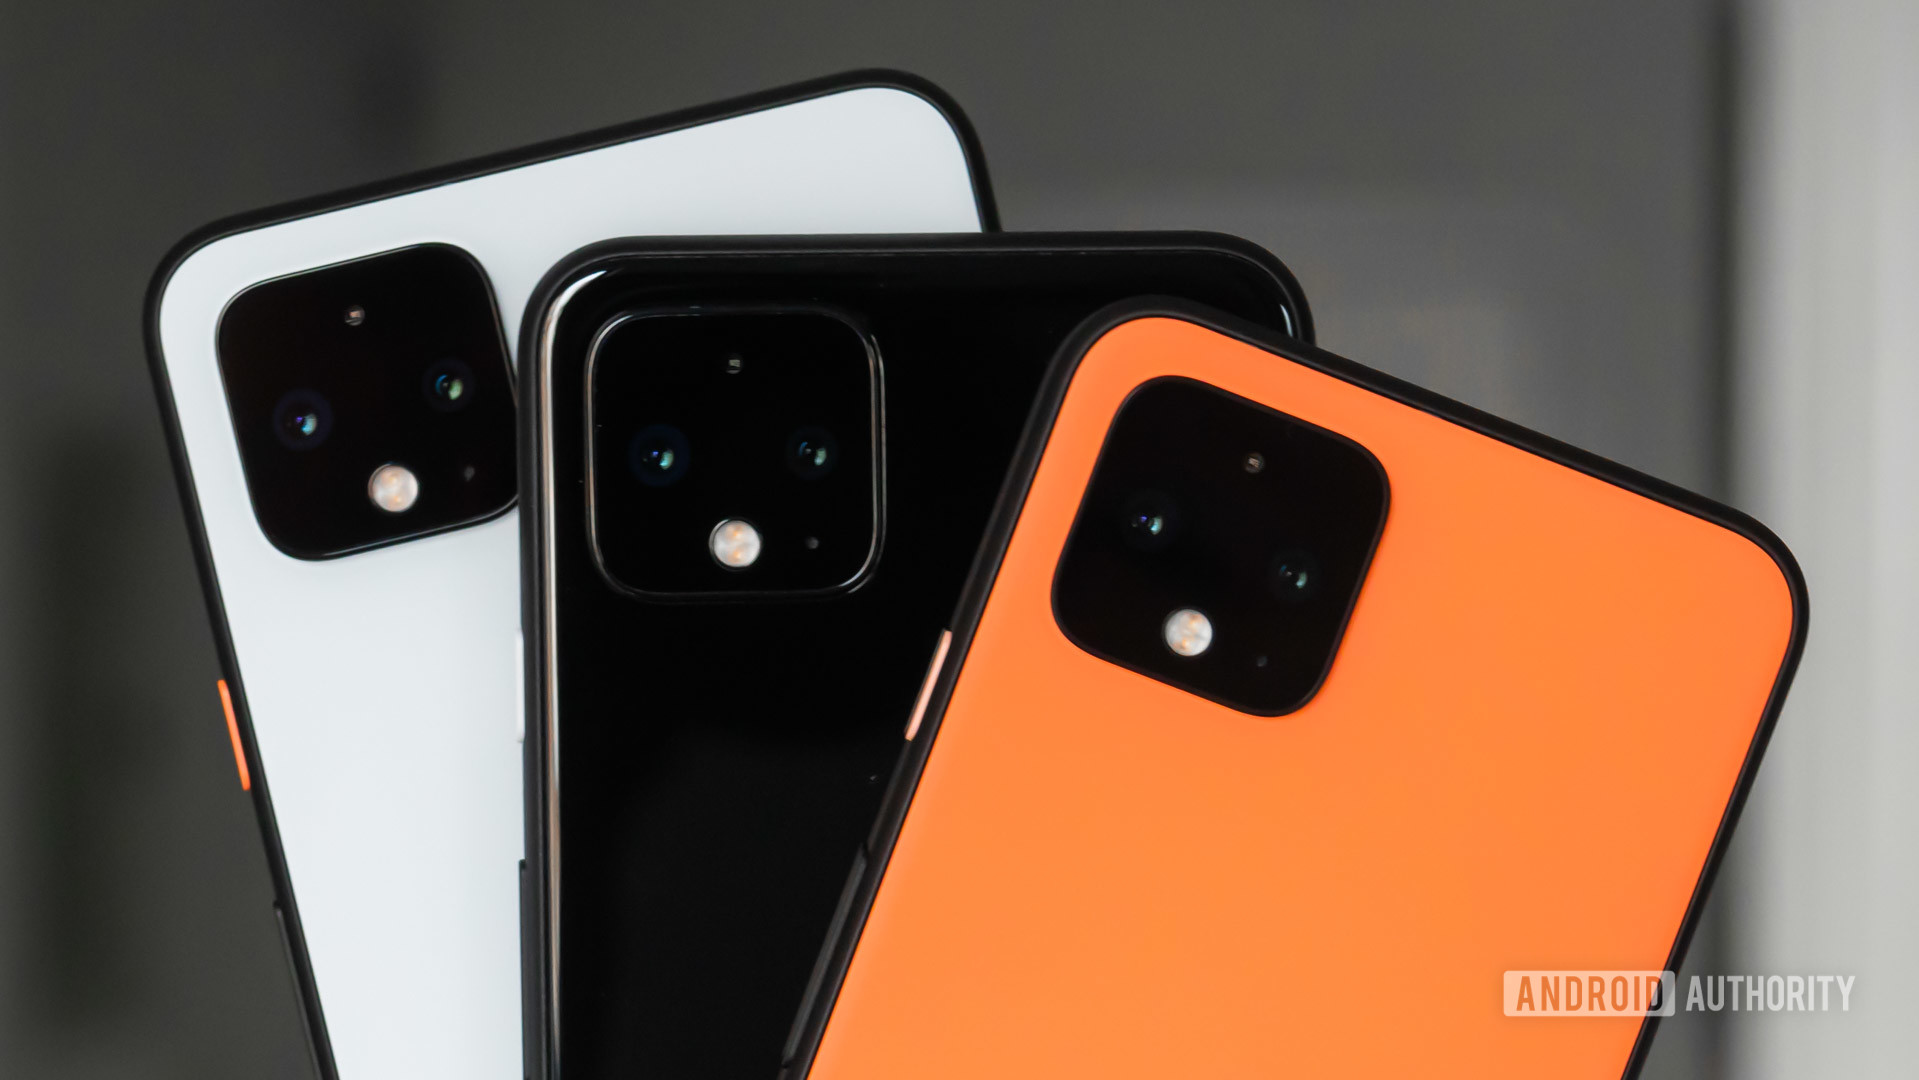 It looks like the Pixel 4 series didn't meet Google hardware sales expectations.